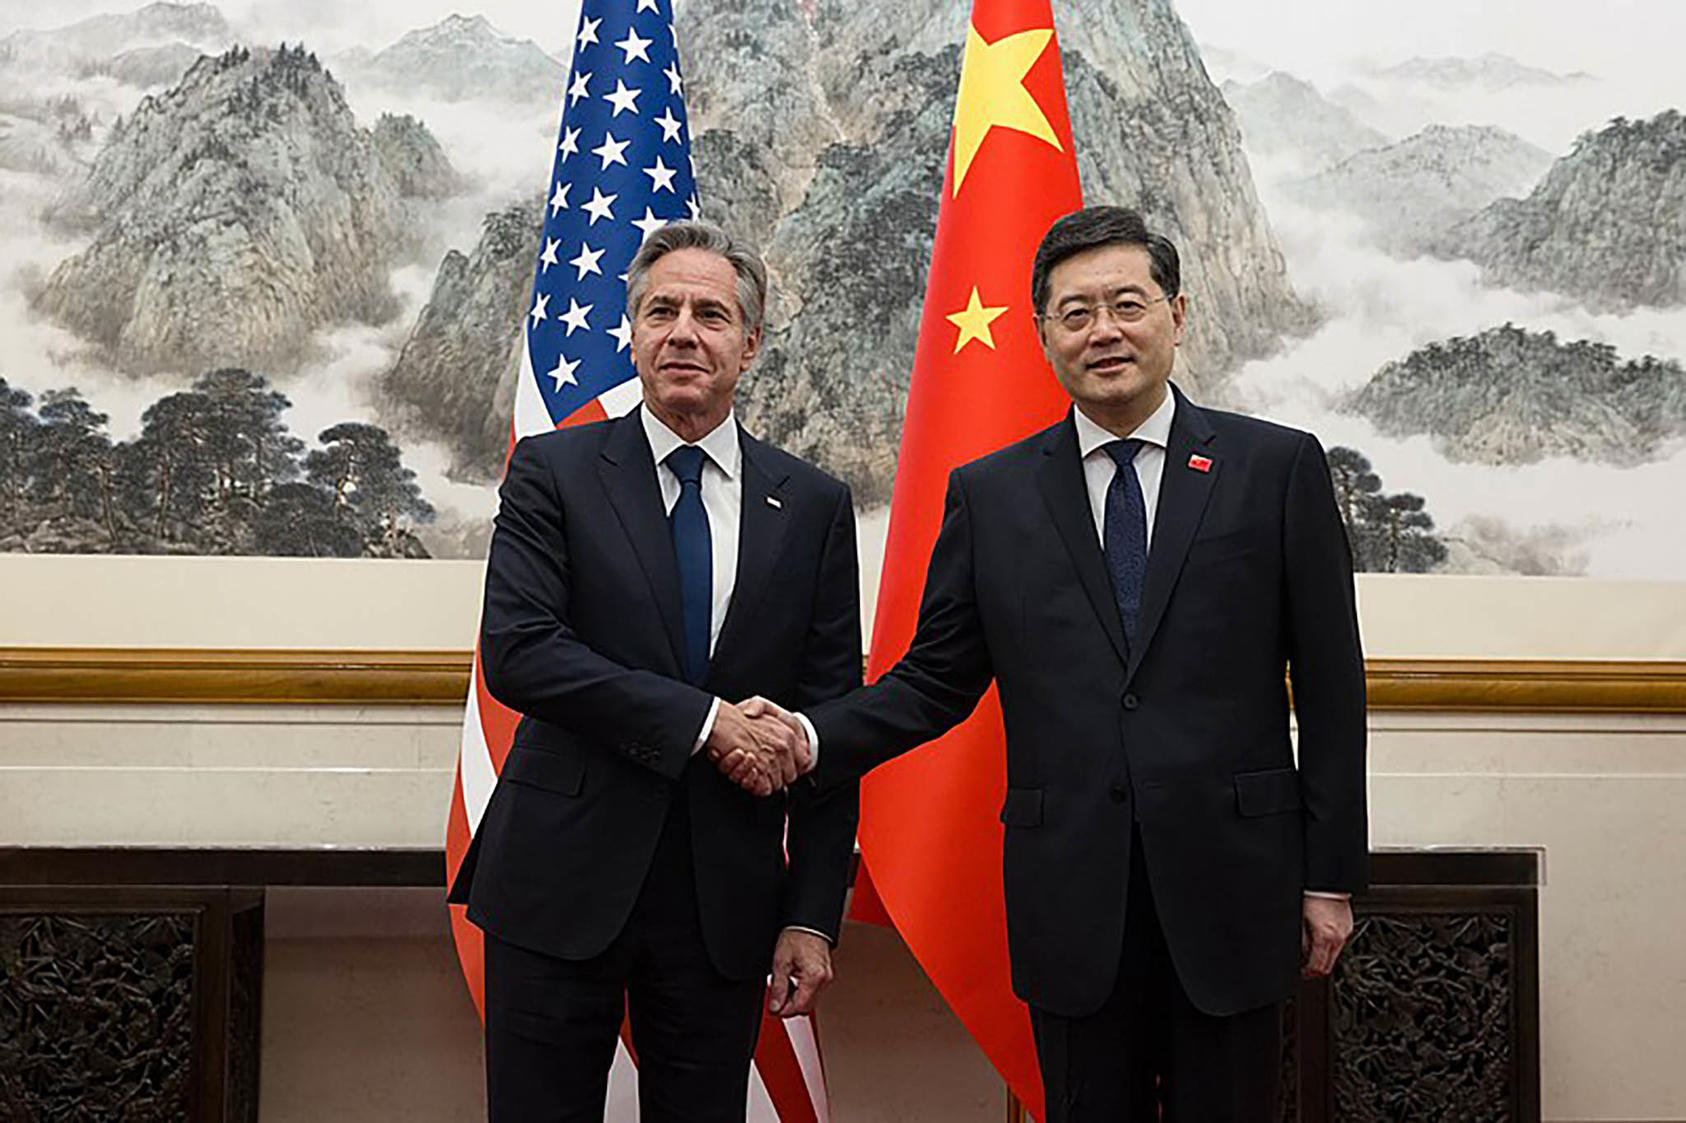 Secretary Blinken shakes hands with Chinese Foreign Minister Qin Gang in Beijing, June 18, 2023. (U.S. Department of State)